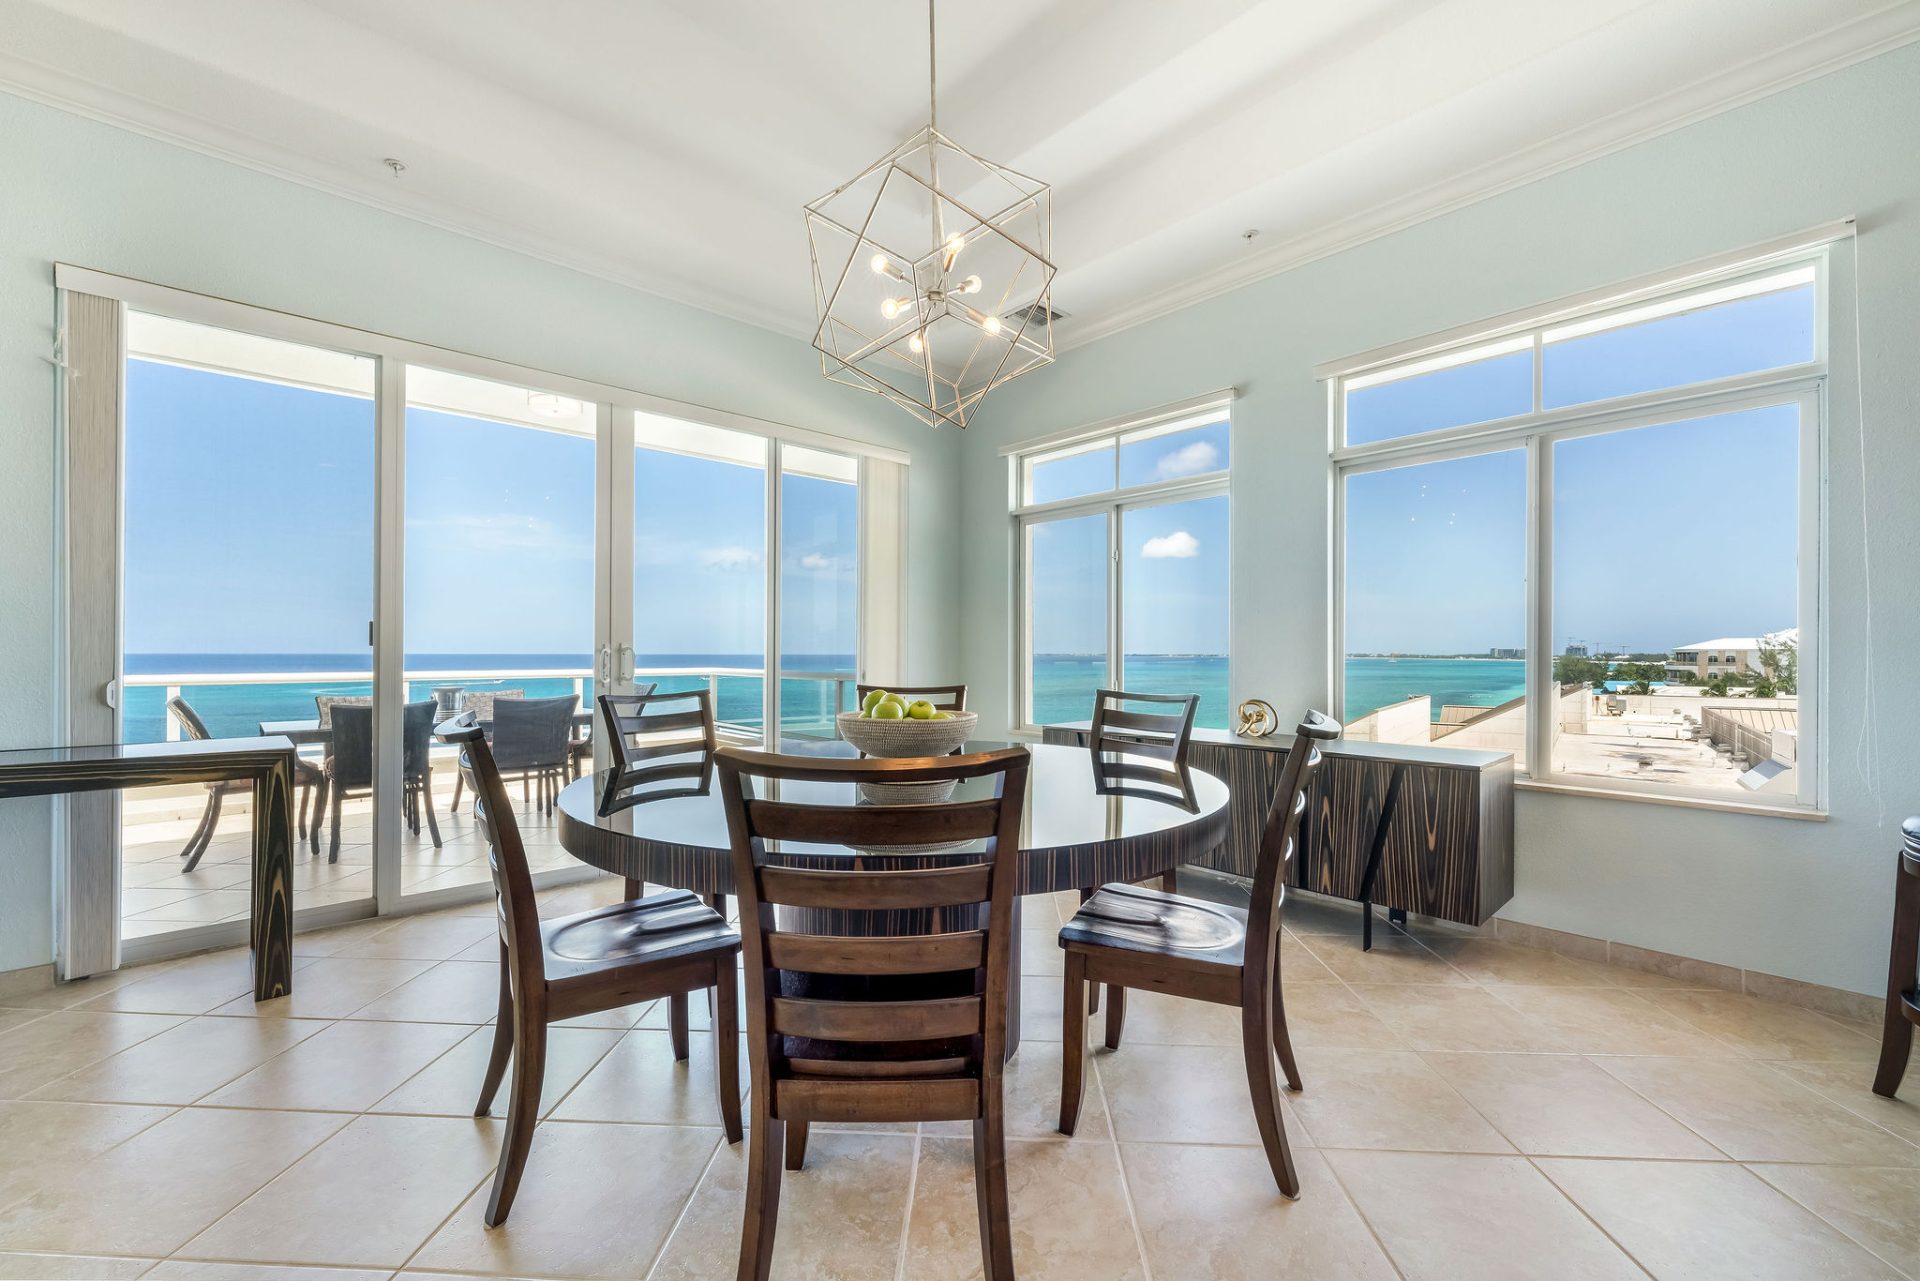 South Bay Beach Club Penthouse dining area outside view